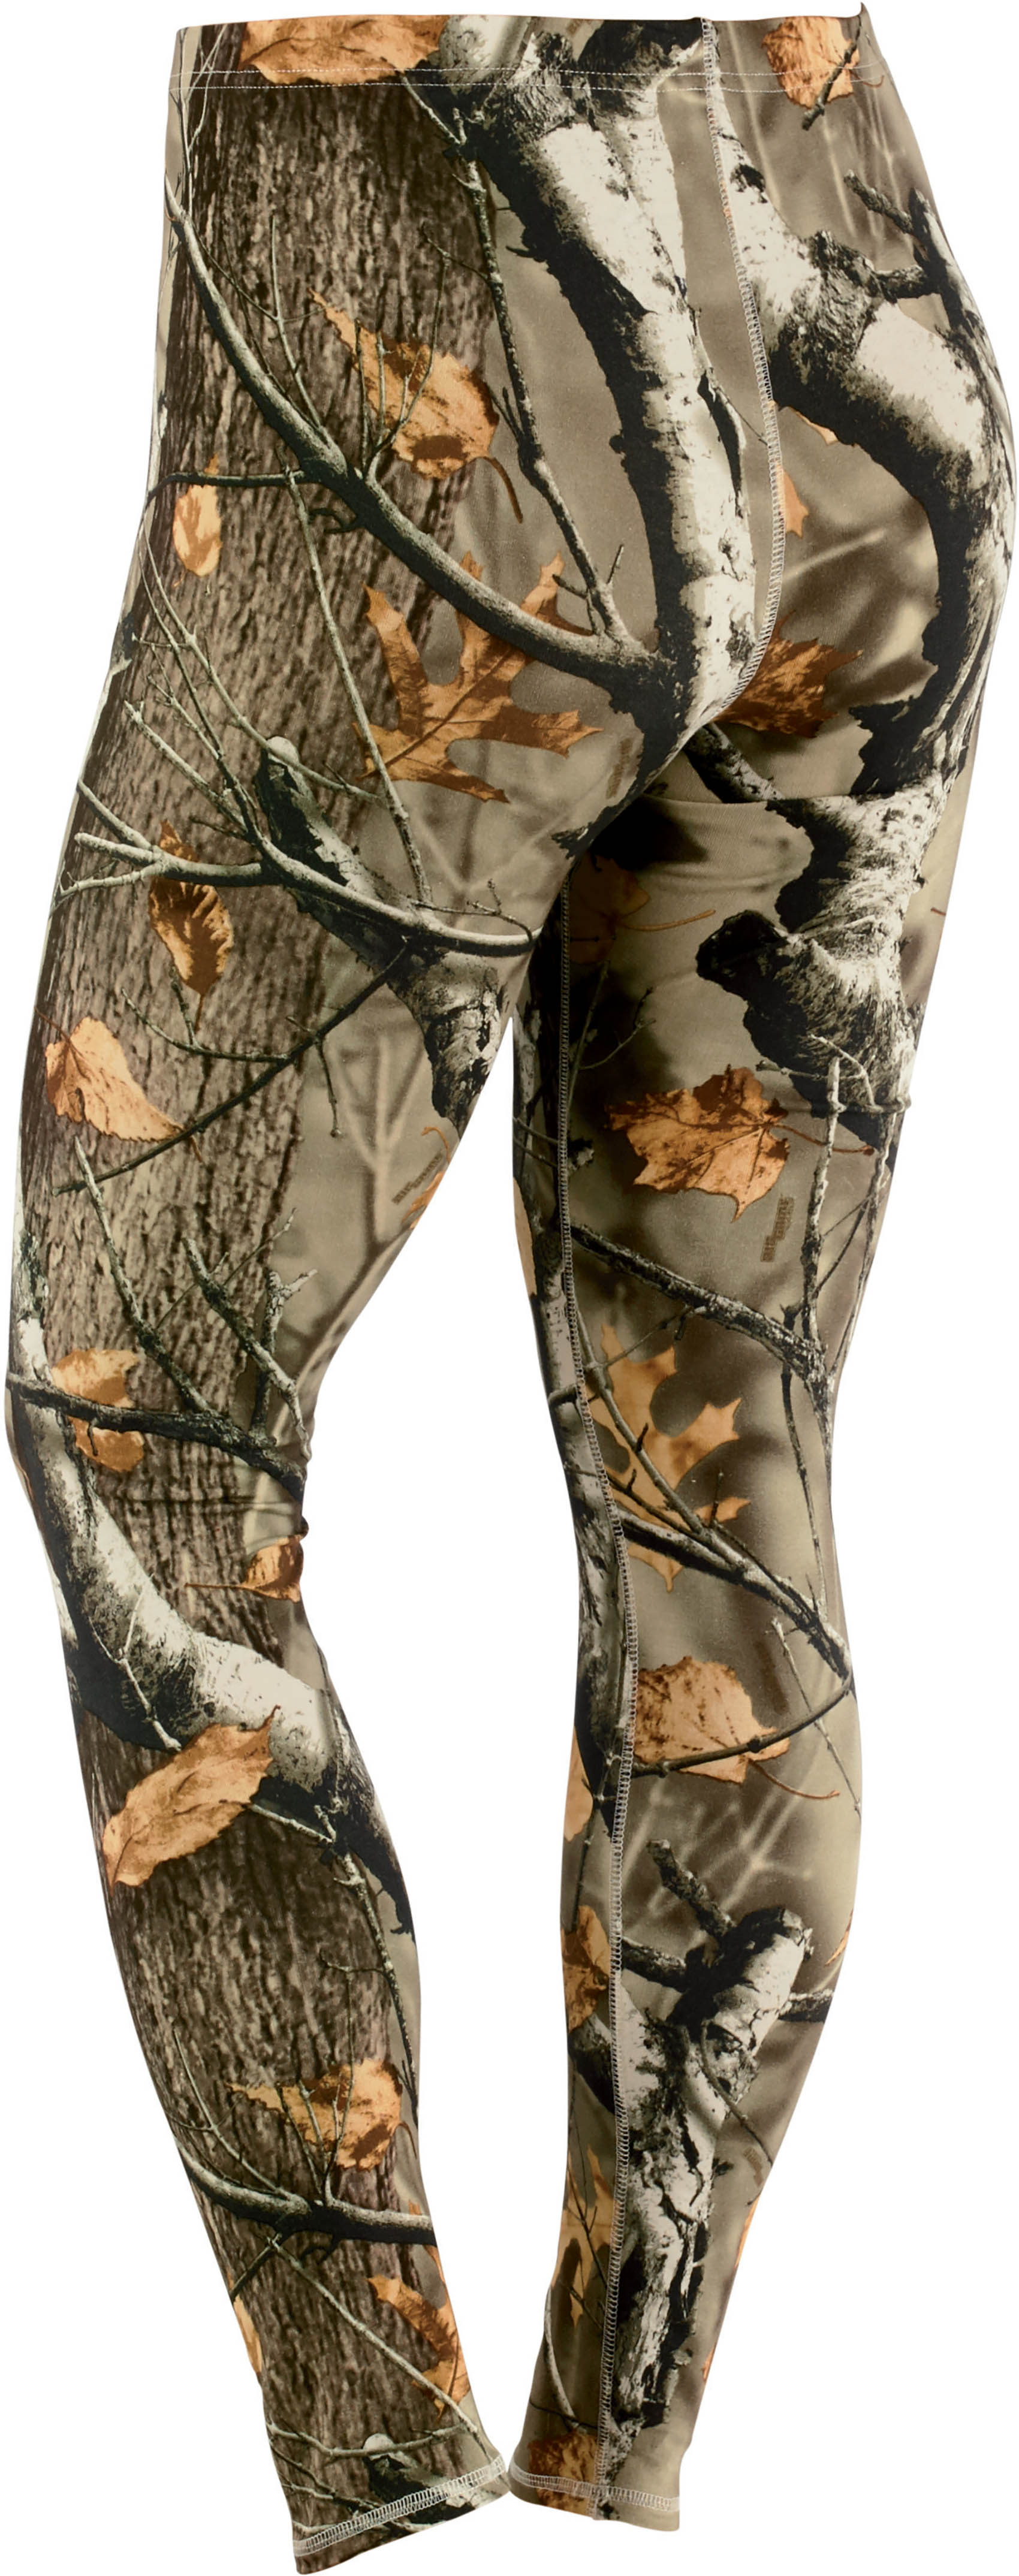 Dallas Cowboys Leaf Camouflage High Waisted Leggings and Tank Top -  Reallgraphics